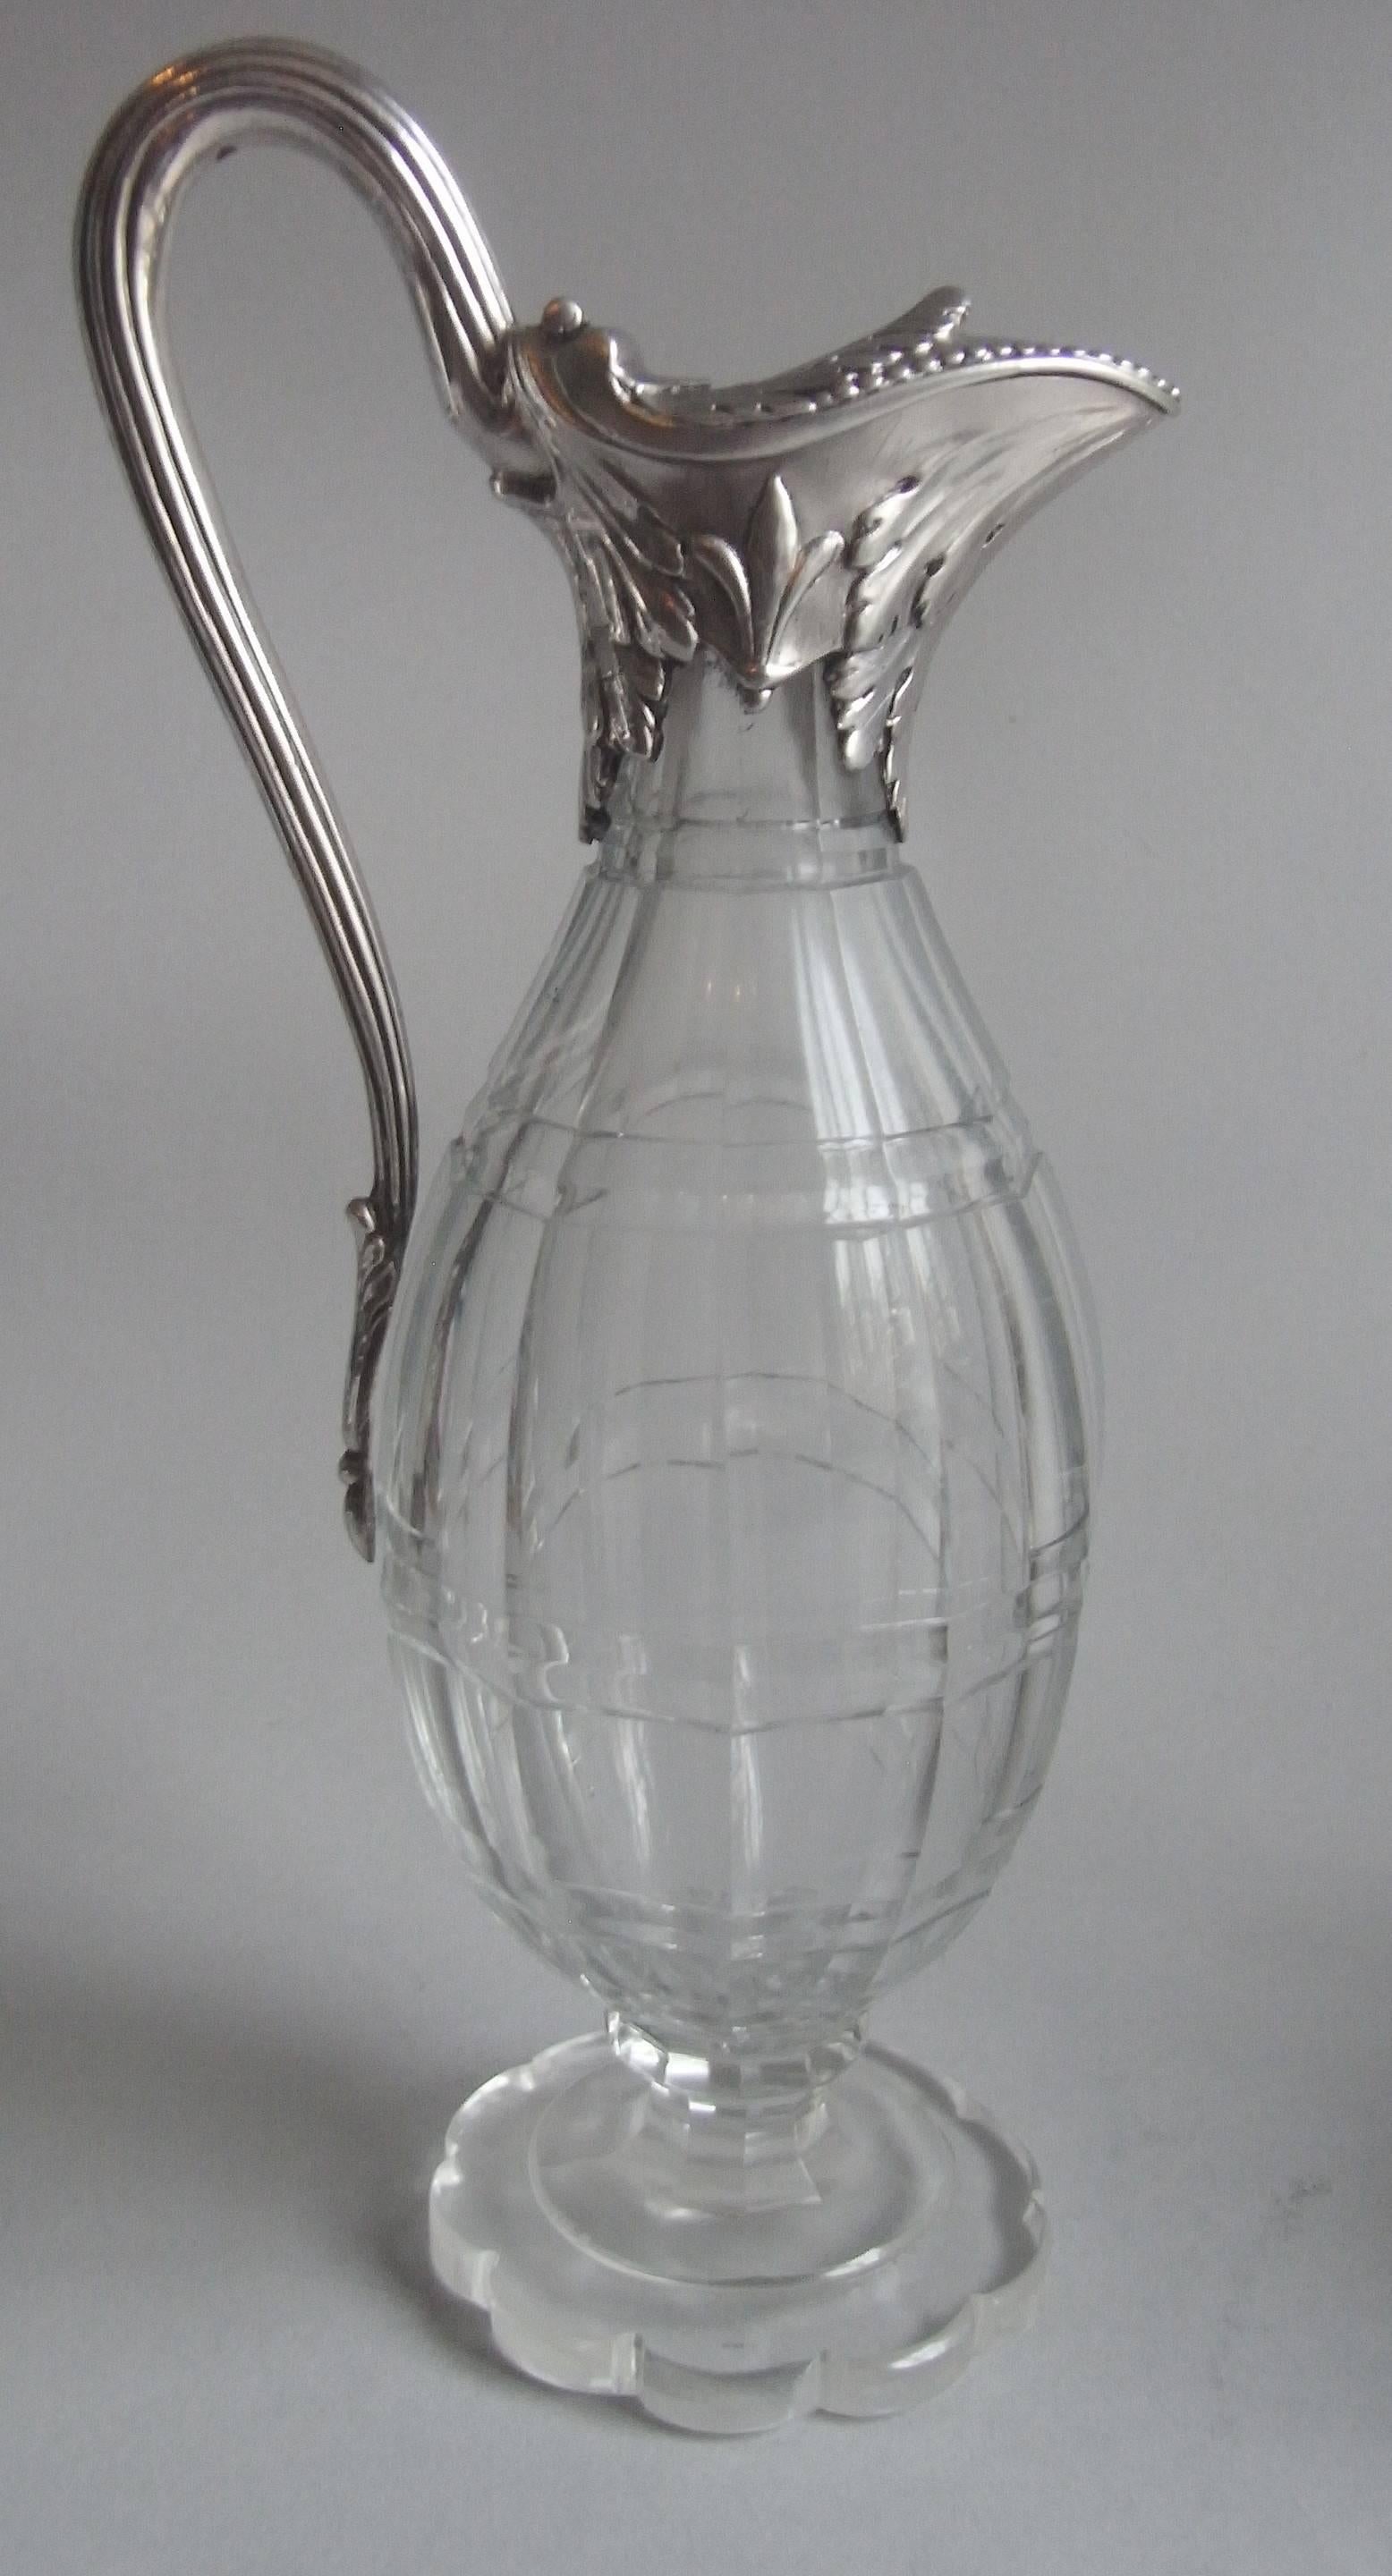 18th Century An important & extremely rare George III Adam Oil & Vinegar Cruet made in London